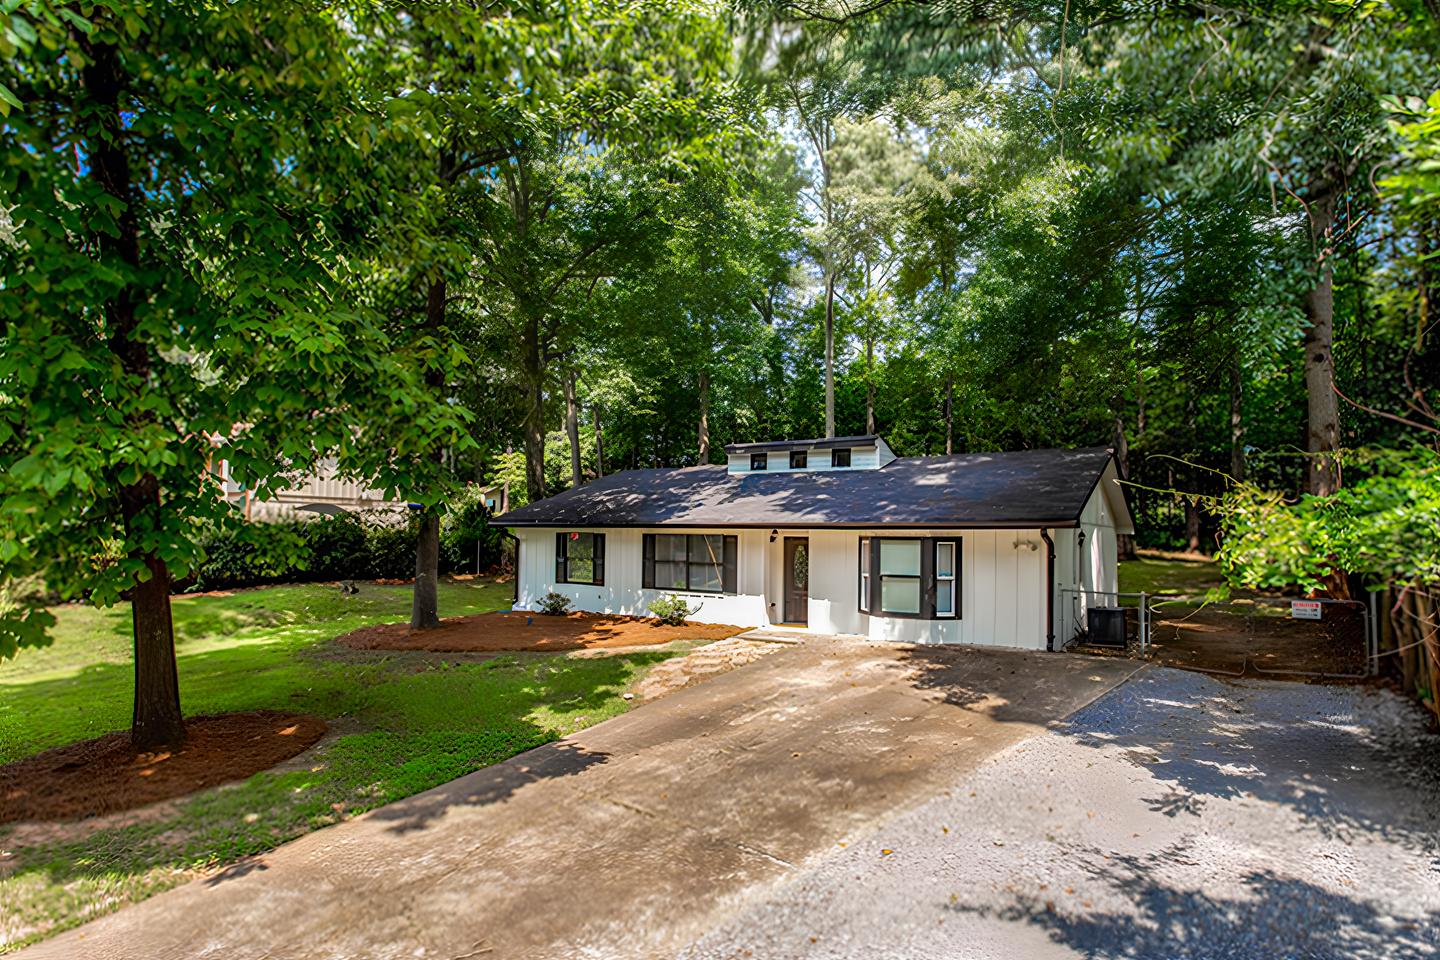 Newly renovated ranch home with on-site parking. Home is in quiet area off Powder Springs Rd.